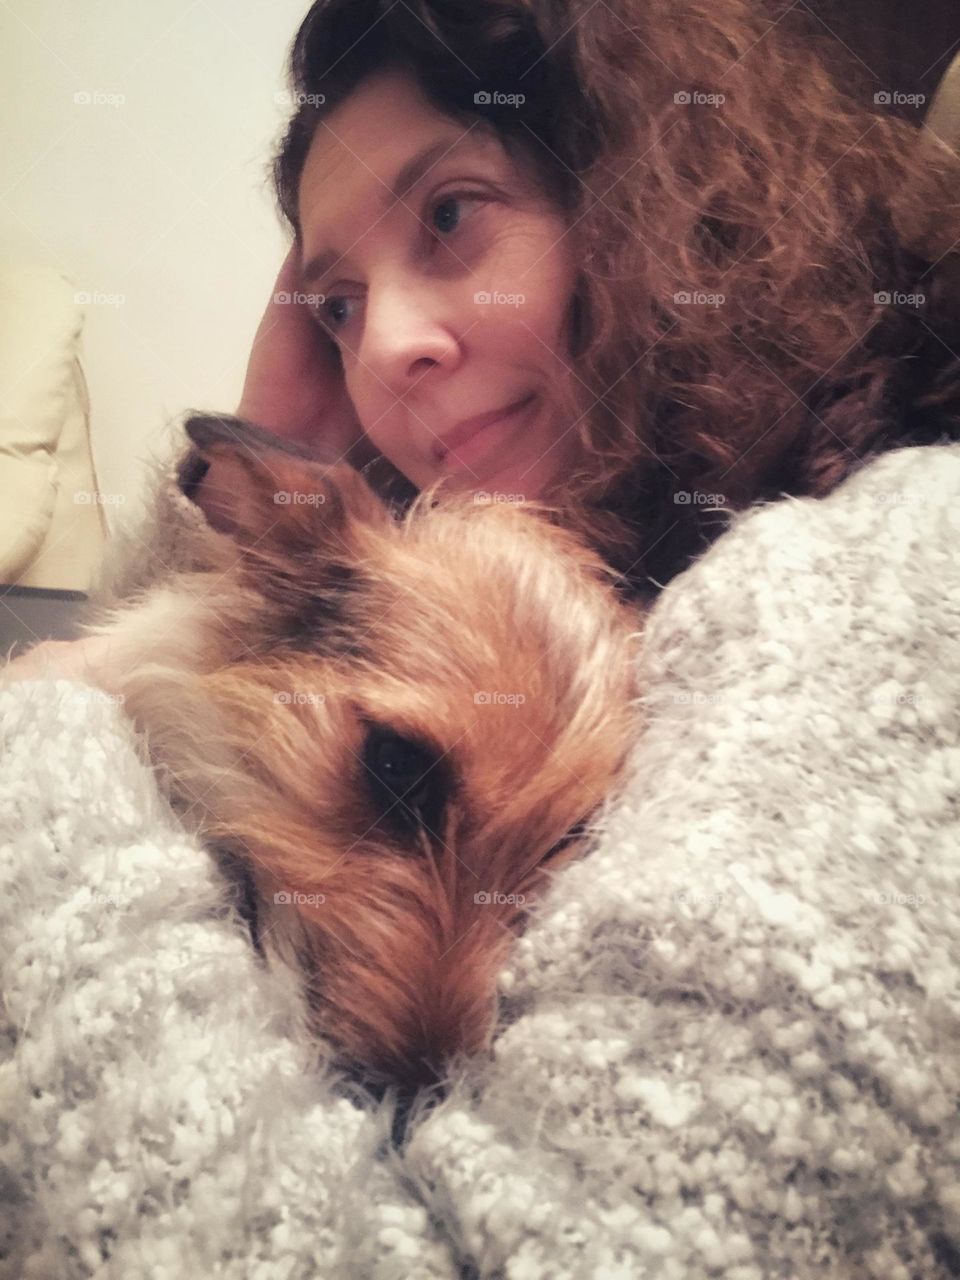 A young pet terrier dog is warmly embraced in the evening. Both are content to snuggle.